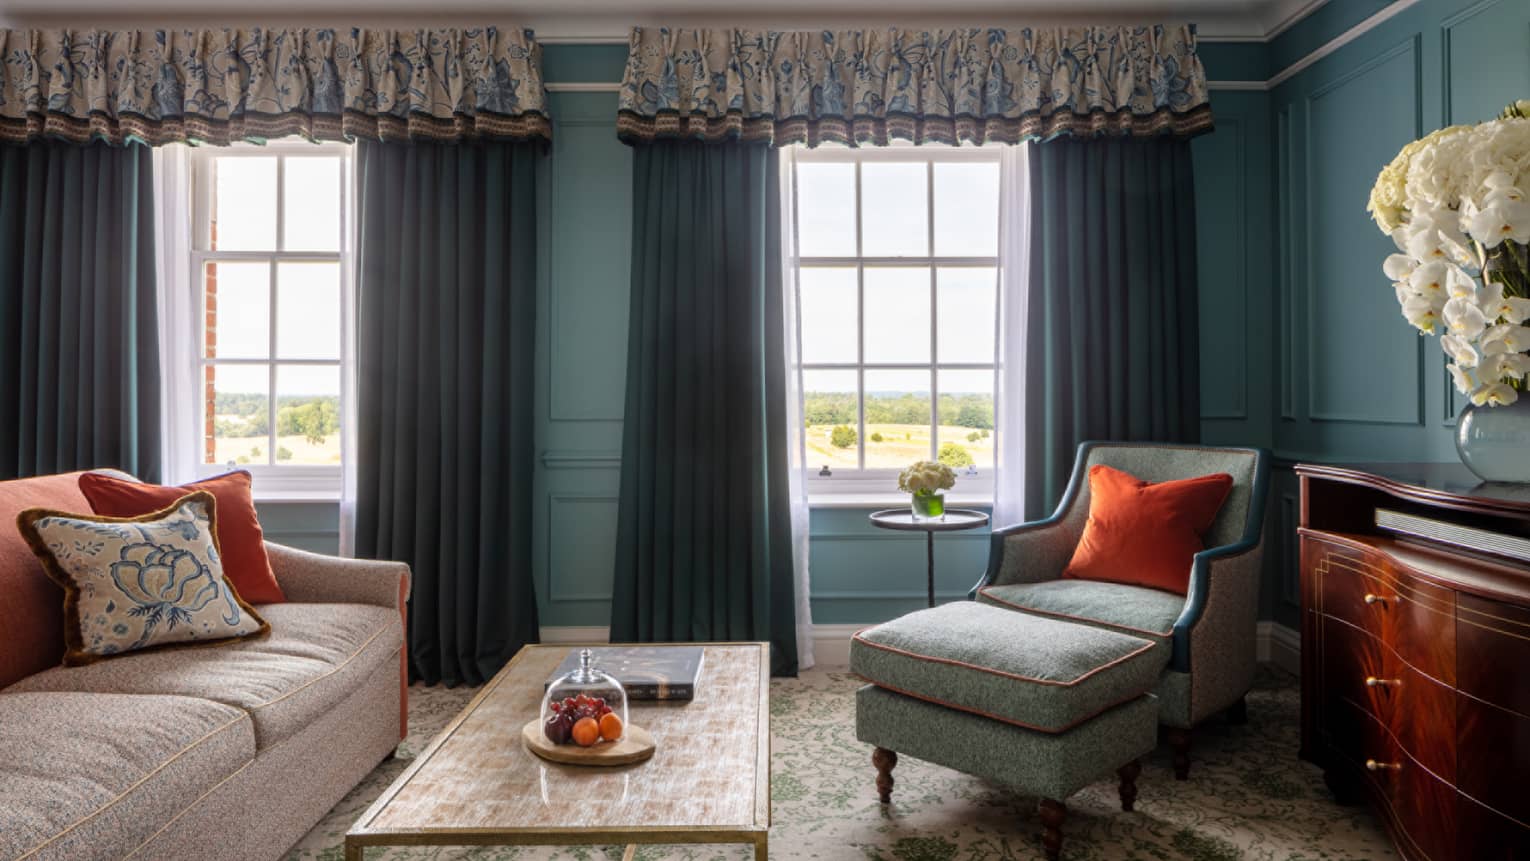 Guest room with cream couch, turquoise chaise, cherry wardrobe, twin windows with blue drapes